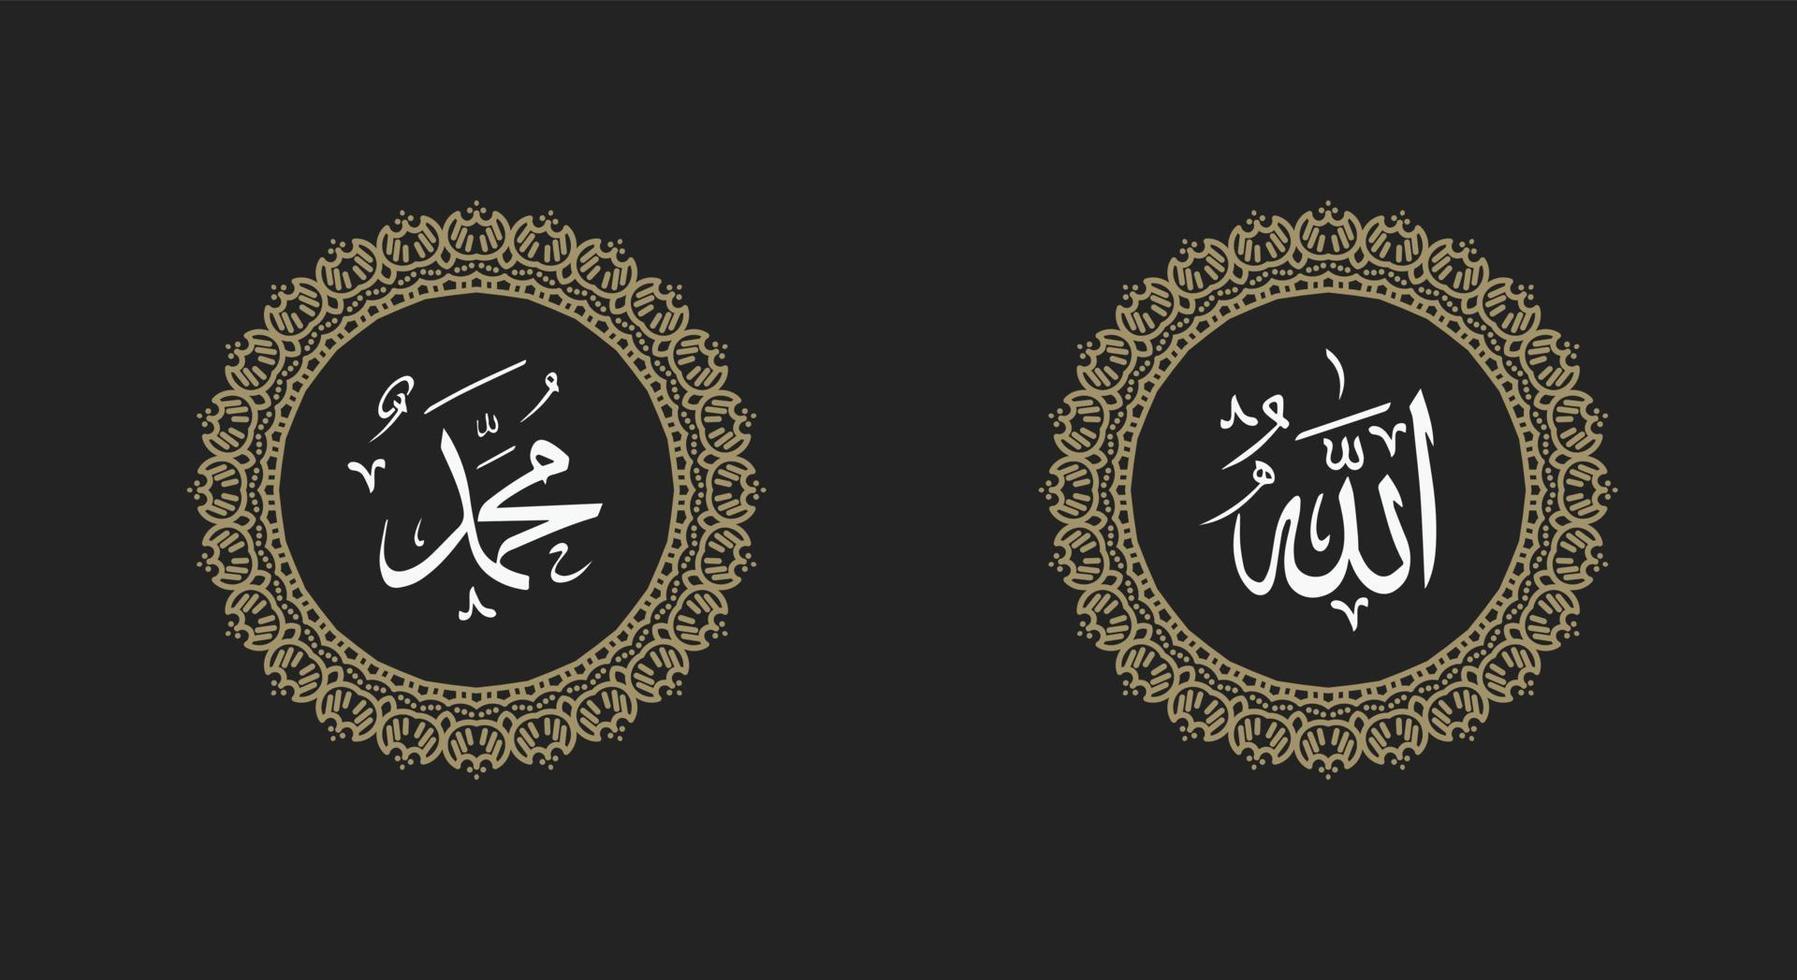 Calligraphy of Allah and Prophet Muhammad. ornament on white background with retro color vector